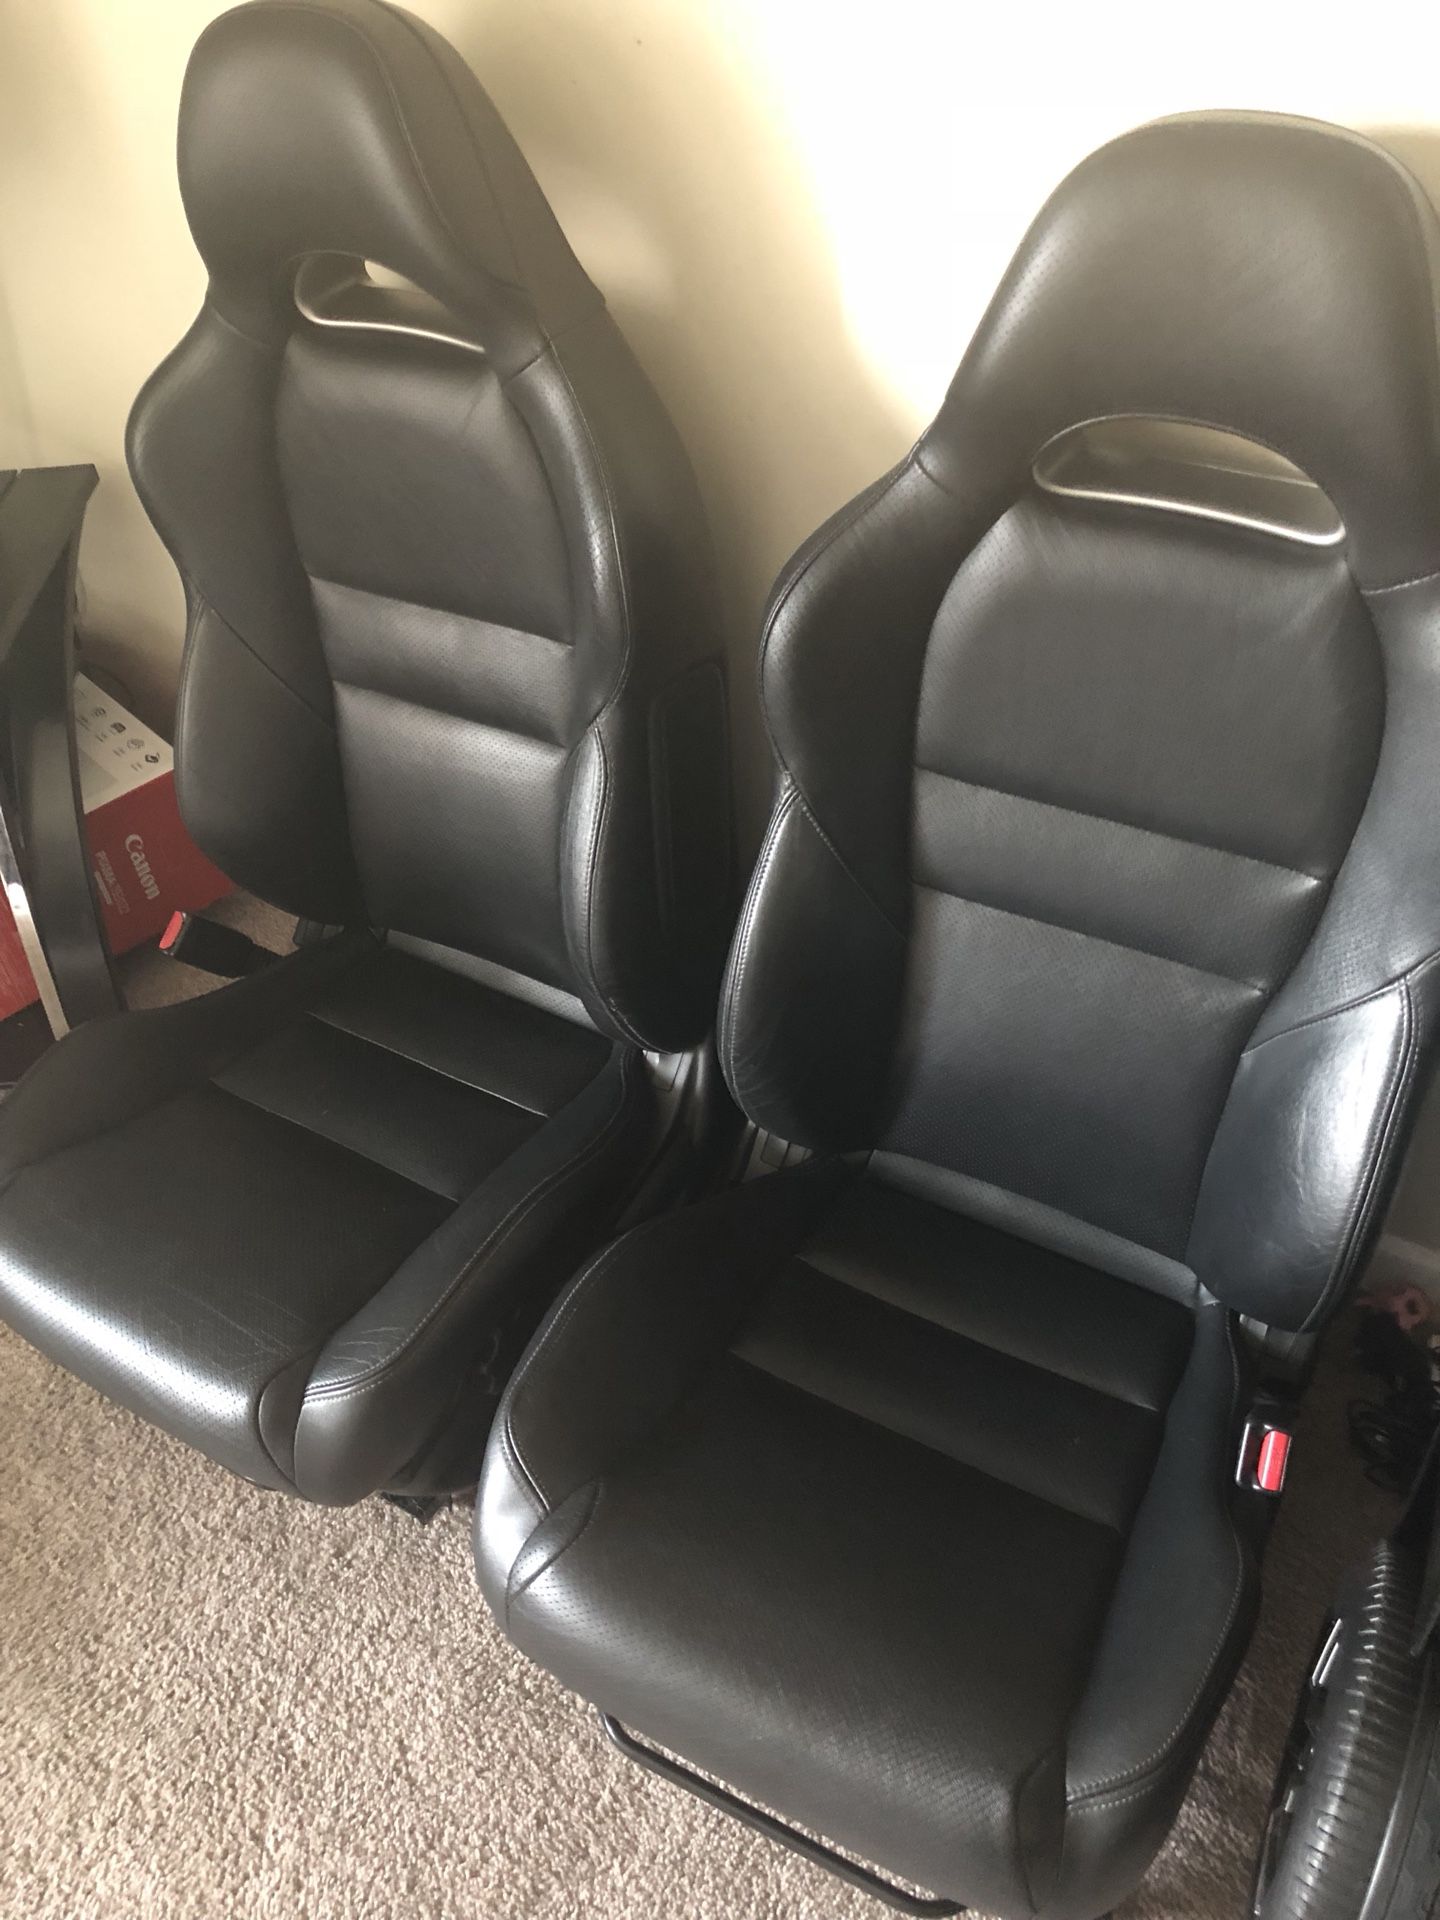 2002 - 2006 Acura RSX type s front leather seats